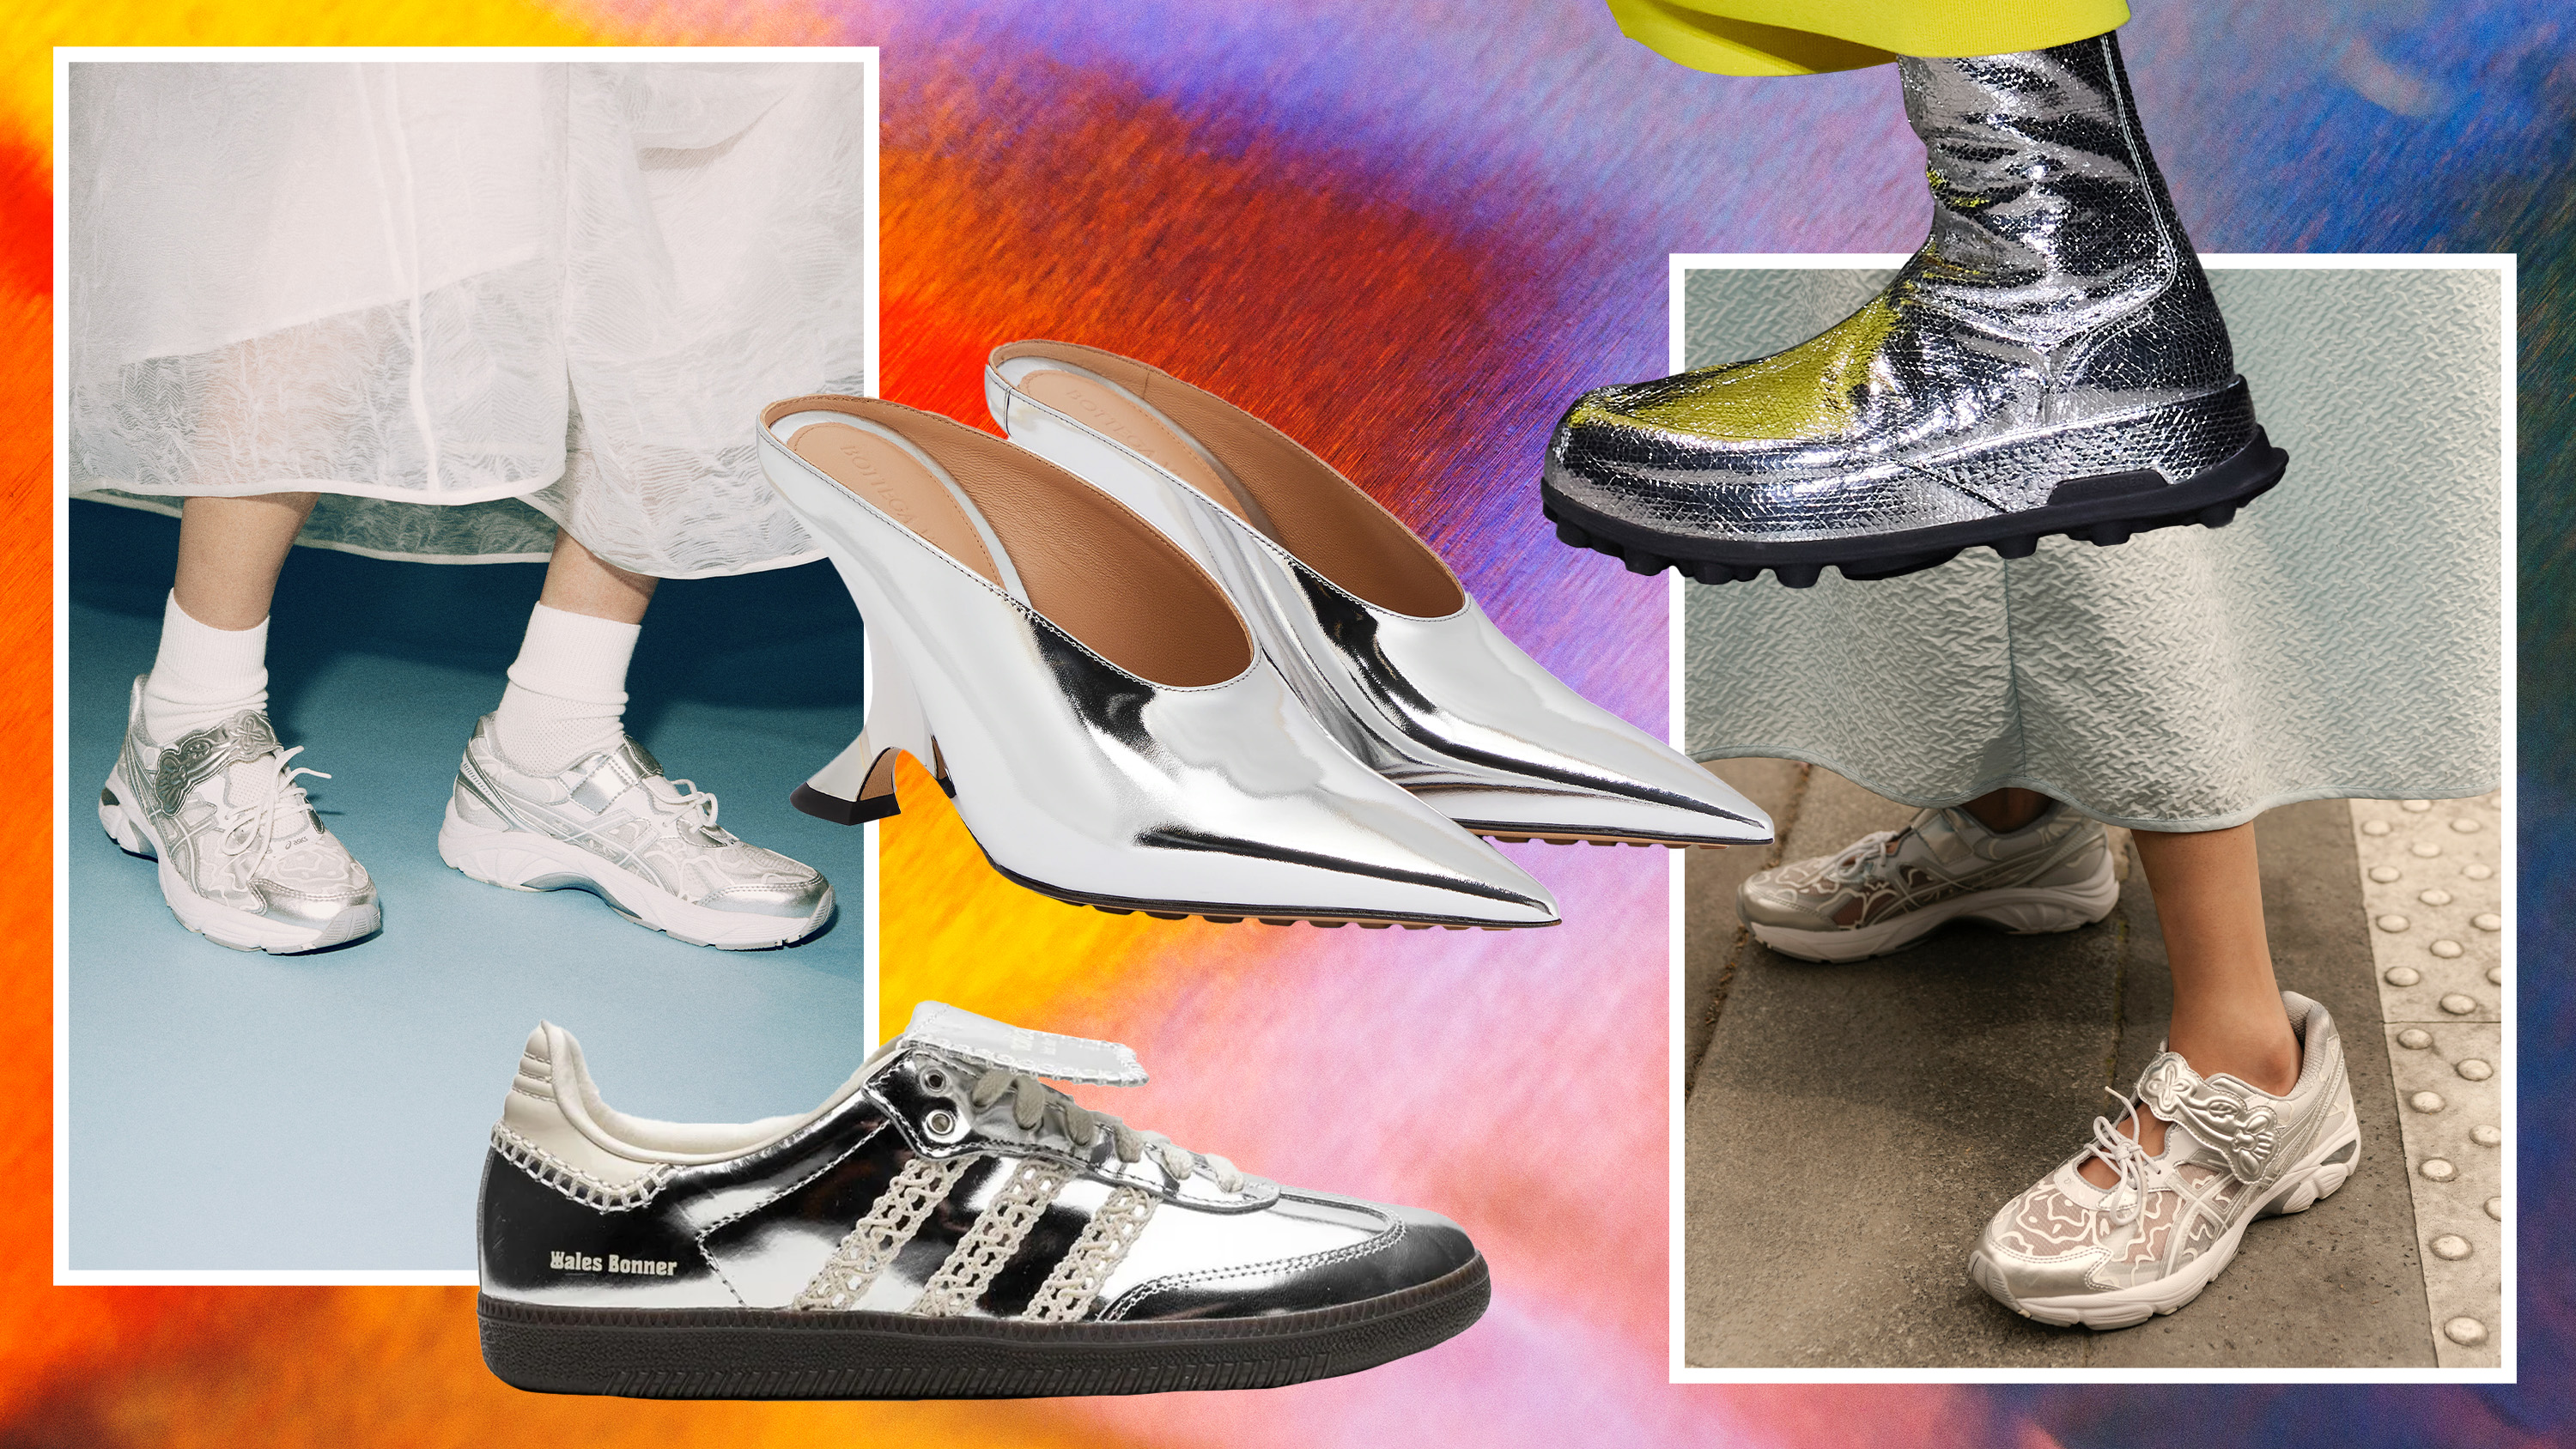 Silver sneakers are this summer's must have footwear trend